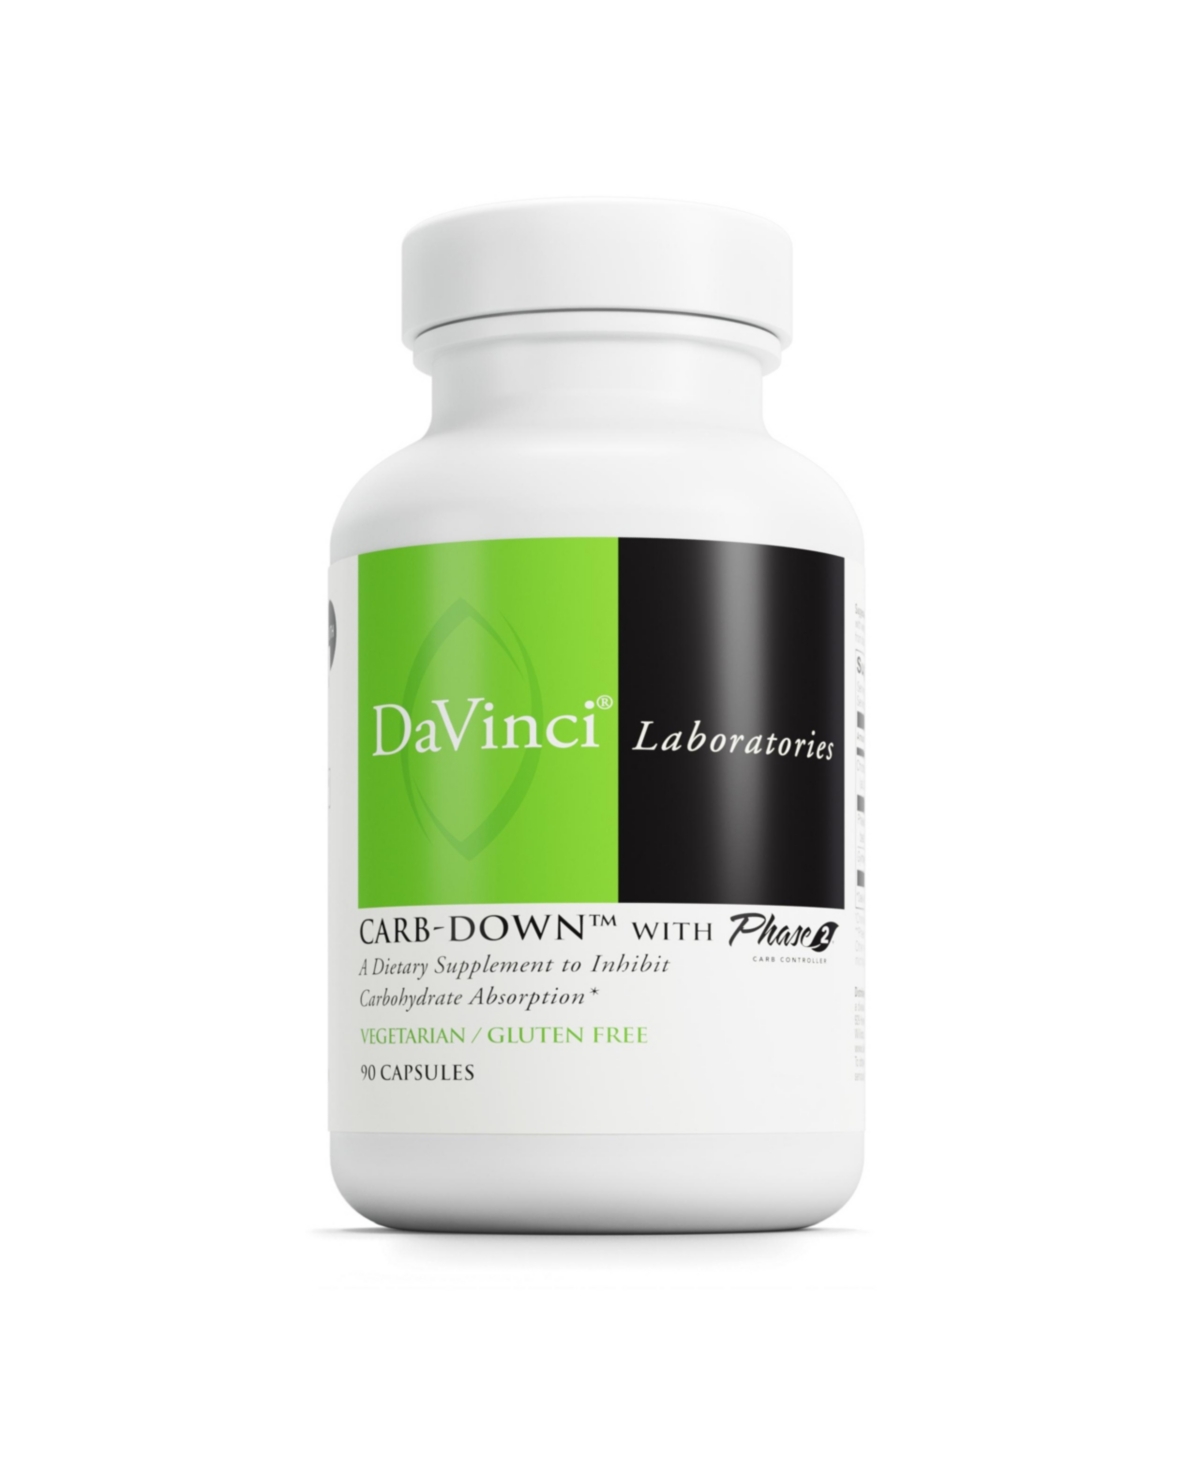 DaVinci Labs Carb-Down with Phase 2 - Dietary Supplement to Support Healthy Weight Management, Appetite Control and Metabolism -